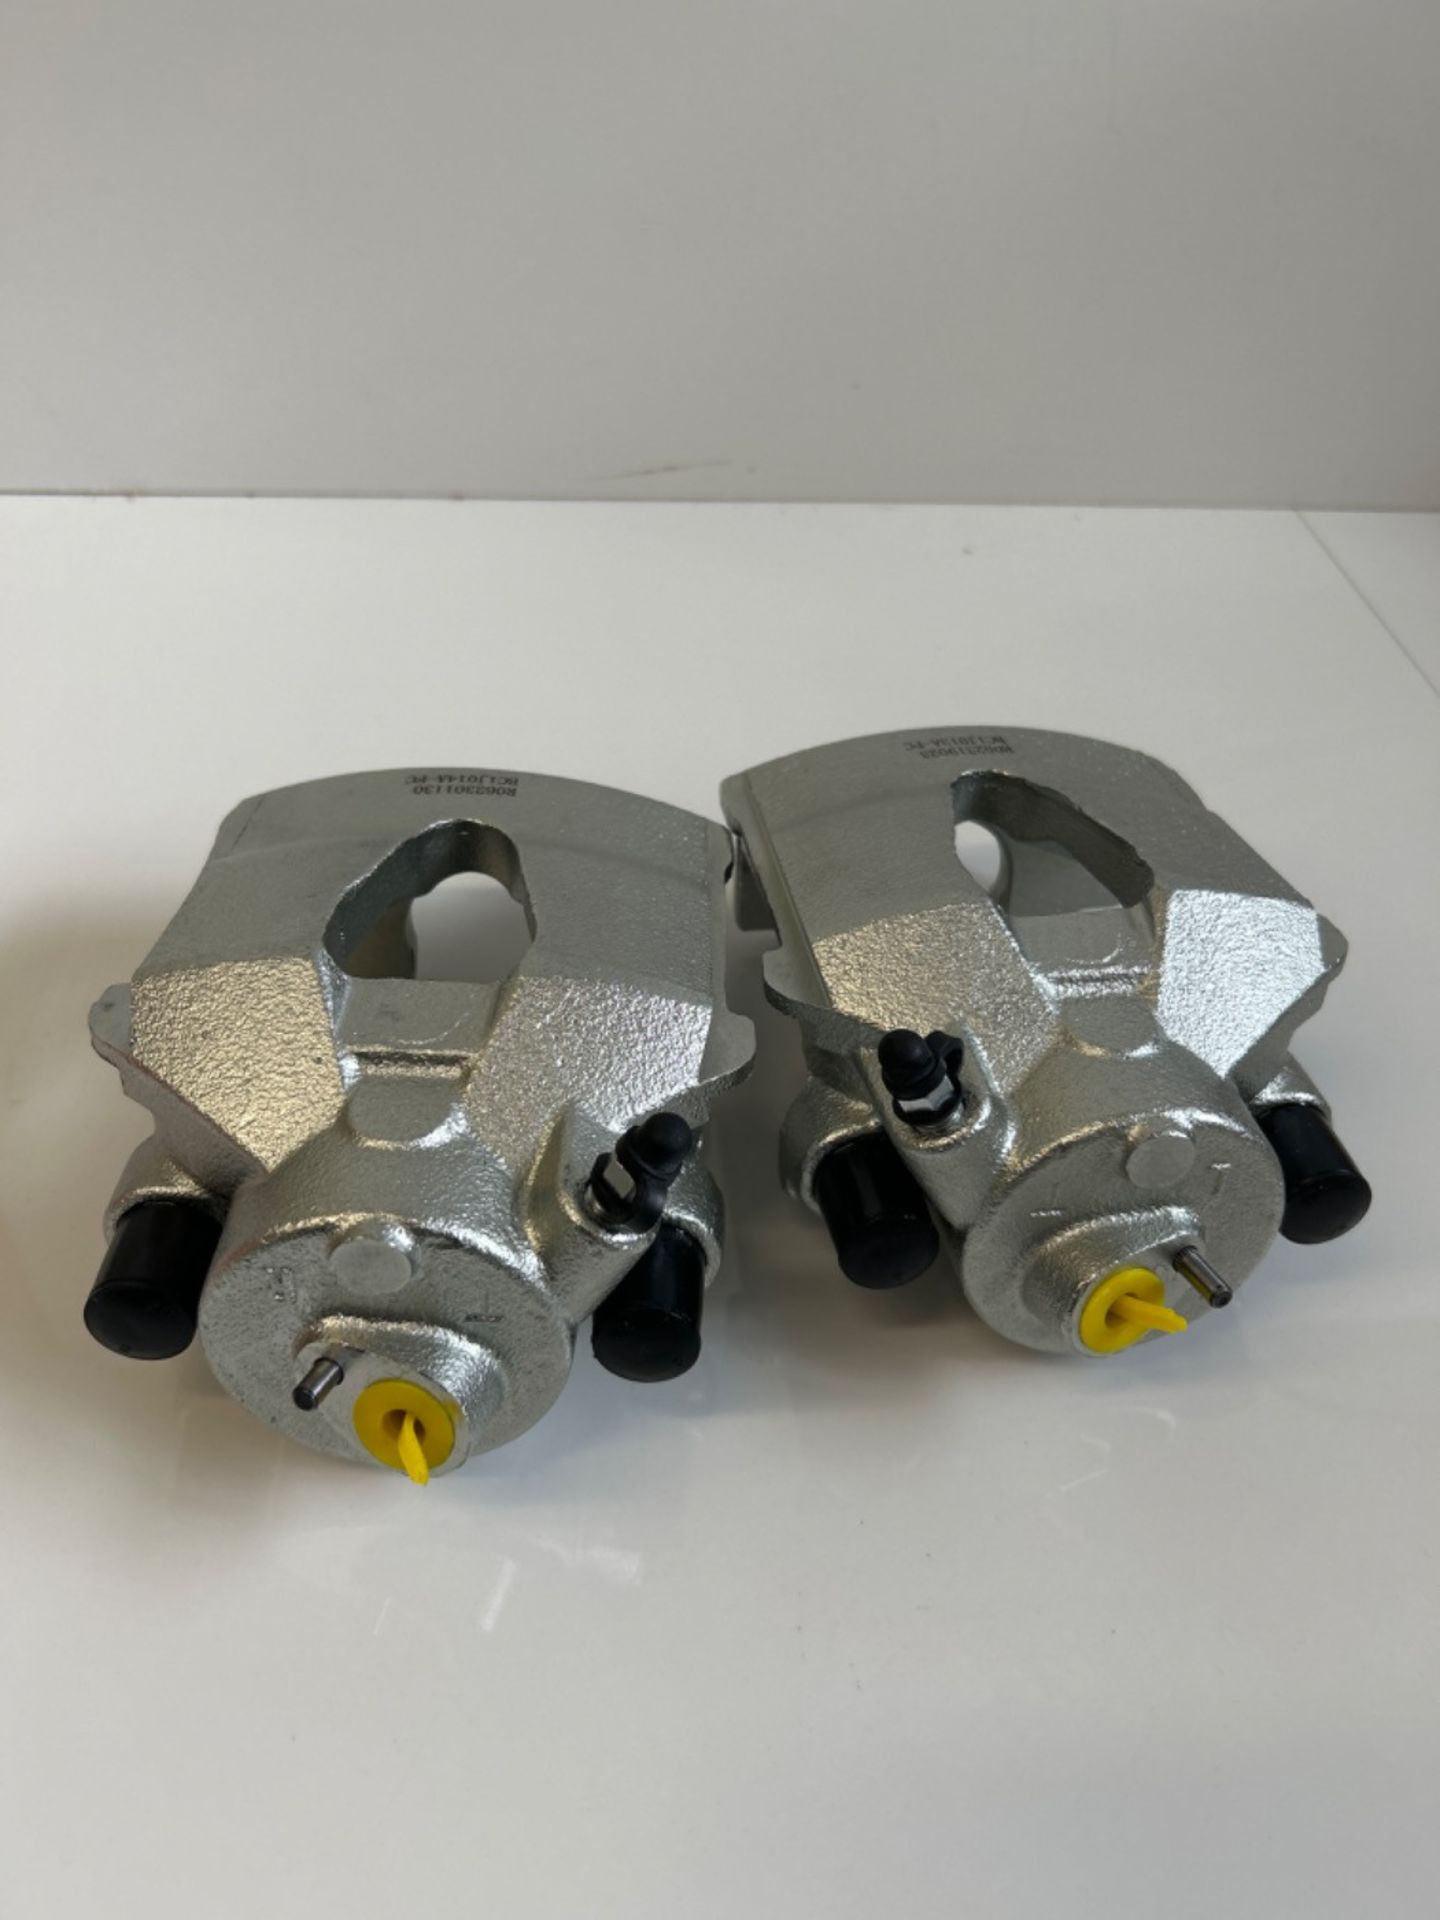 Frankberg 2x Brake Caliper Front Compatible with A1 2010-2018 A3 1996-2013 Ibiza IV 2008-2015 Fabia - Image 3 of 3